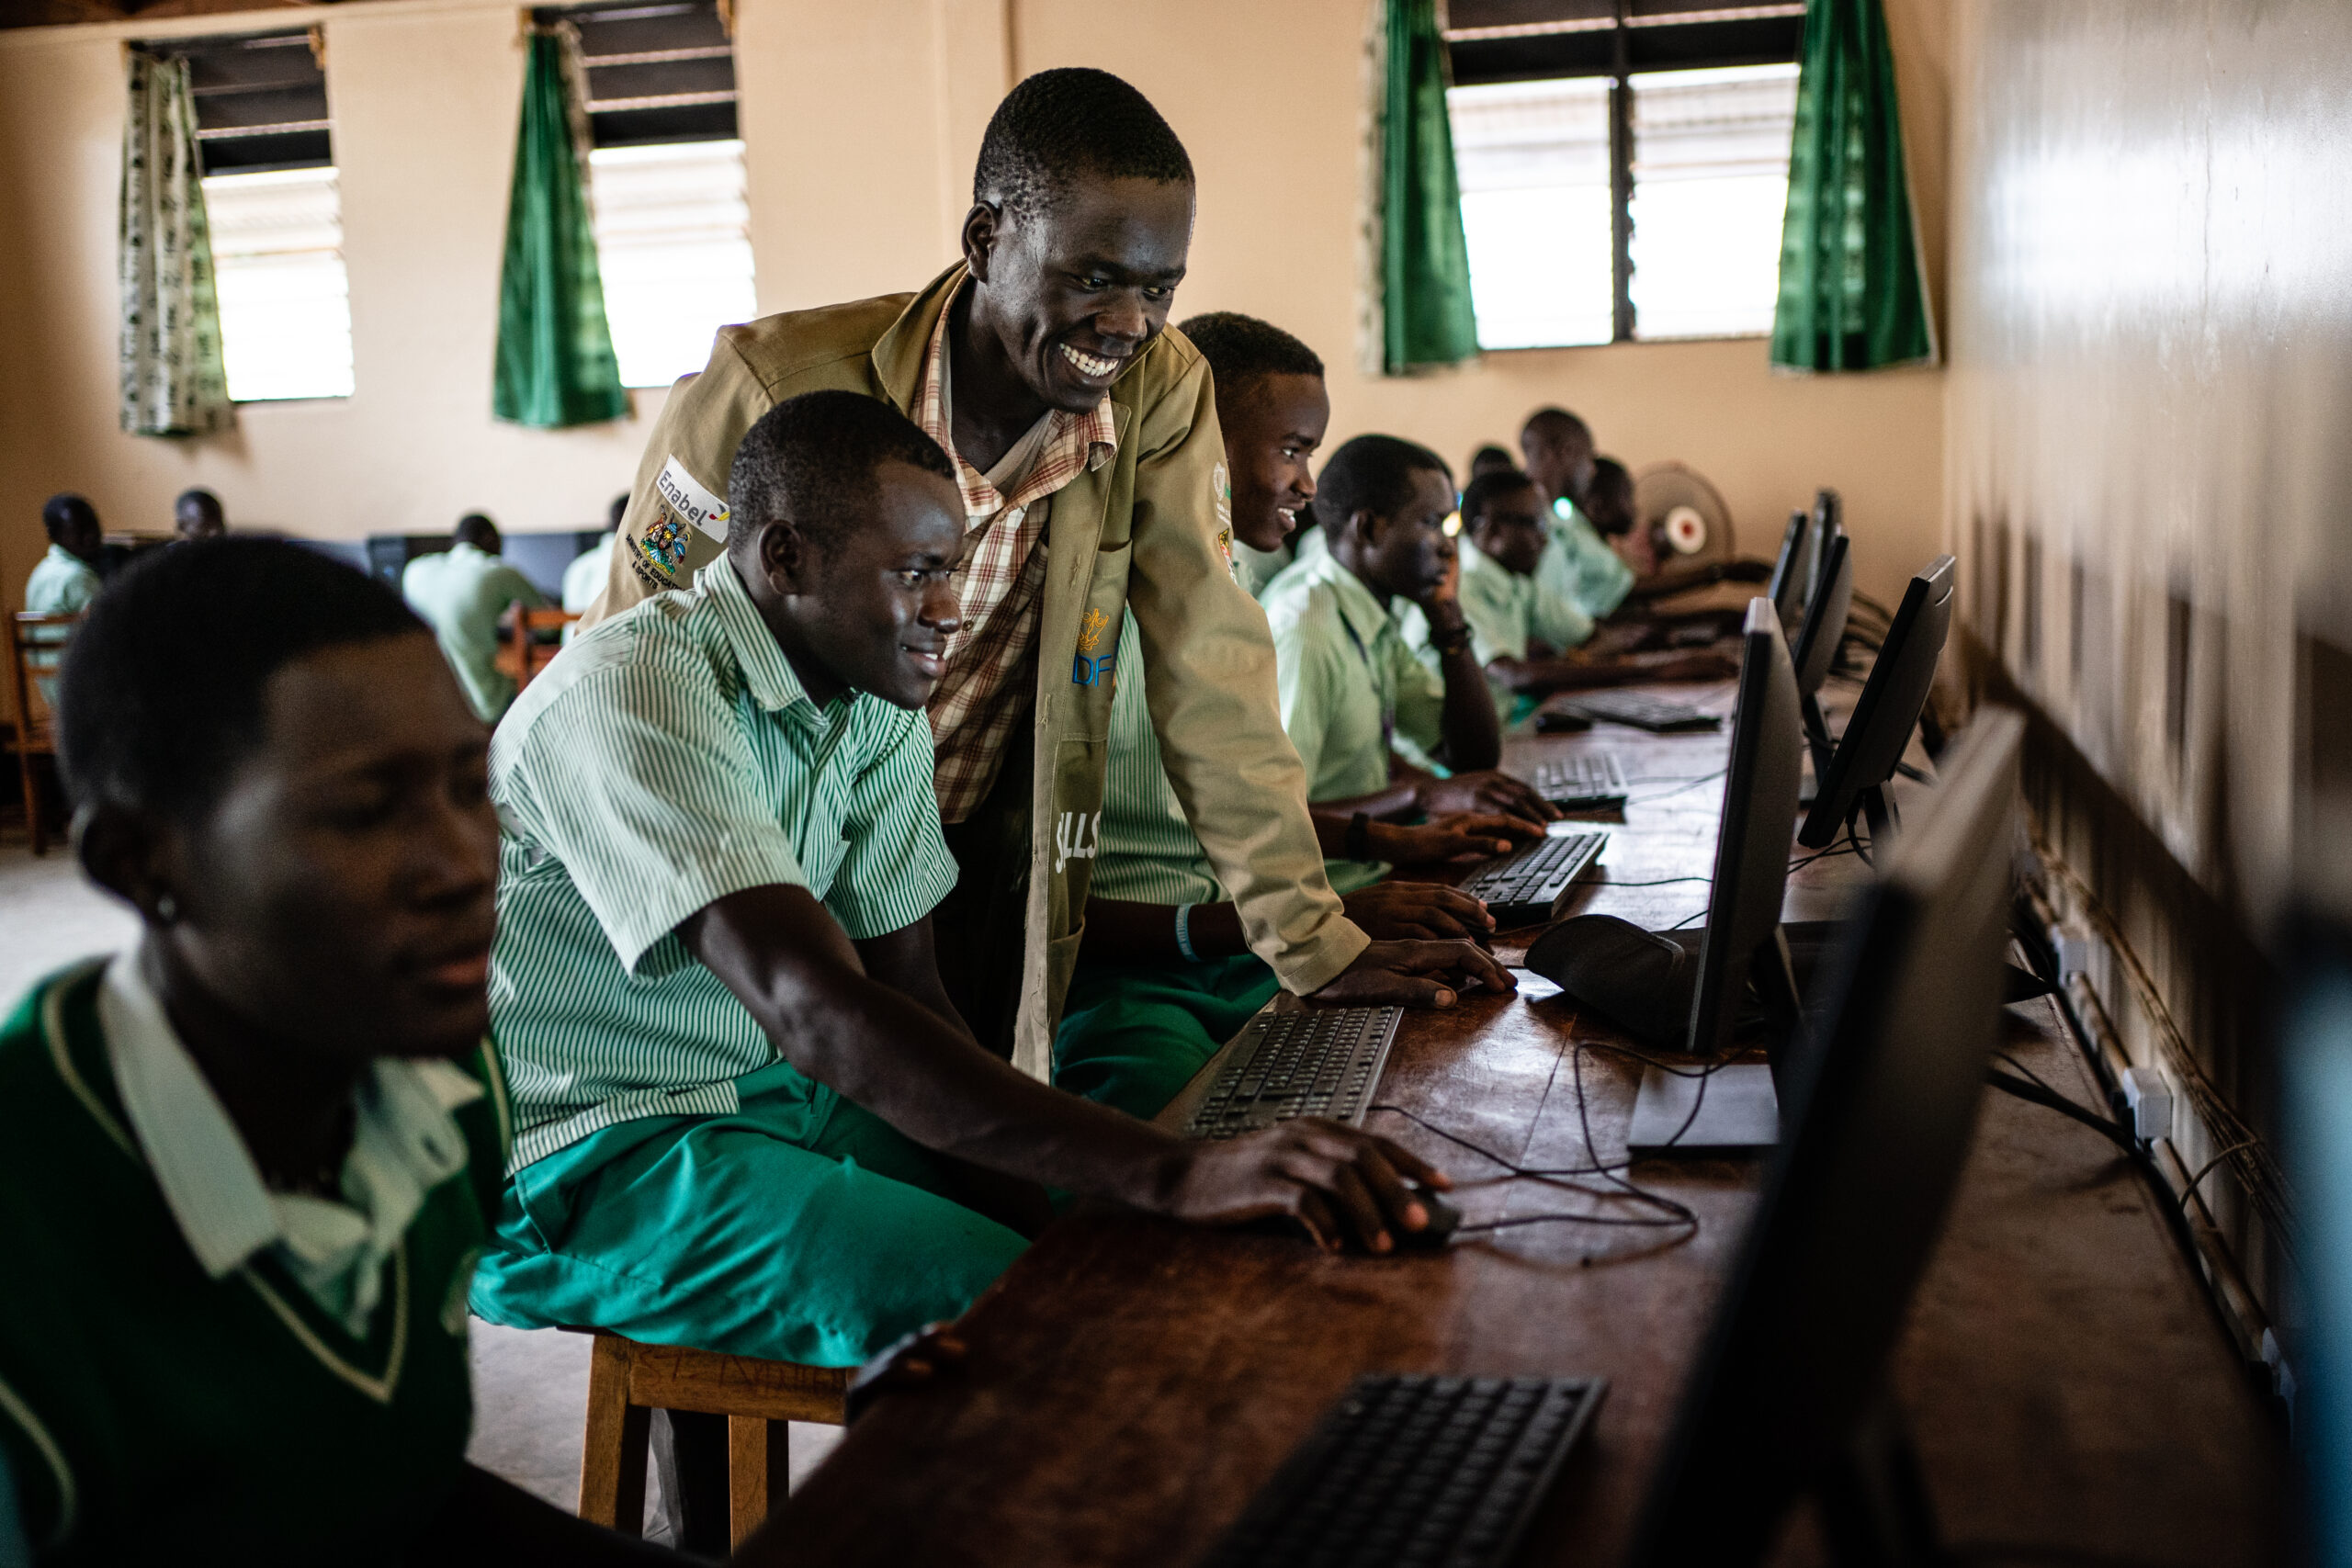 Teacher at a technical vocation institute in Karamoja - Northern Uganda - helps students with their work in the computer lab.